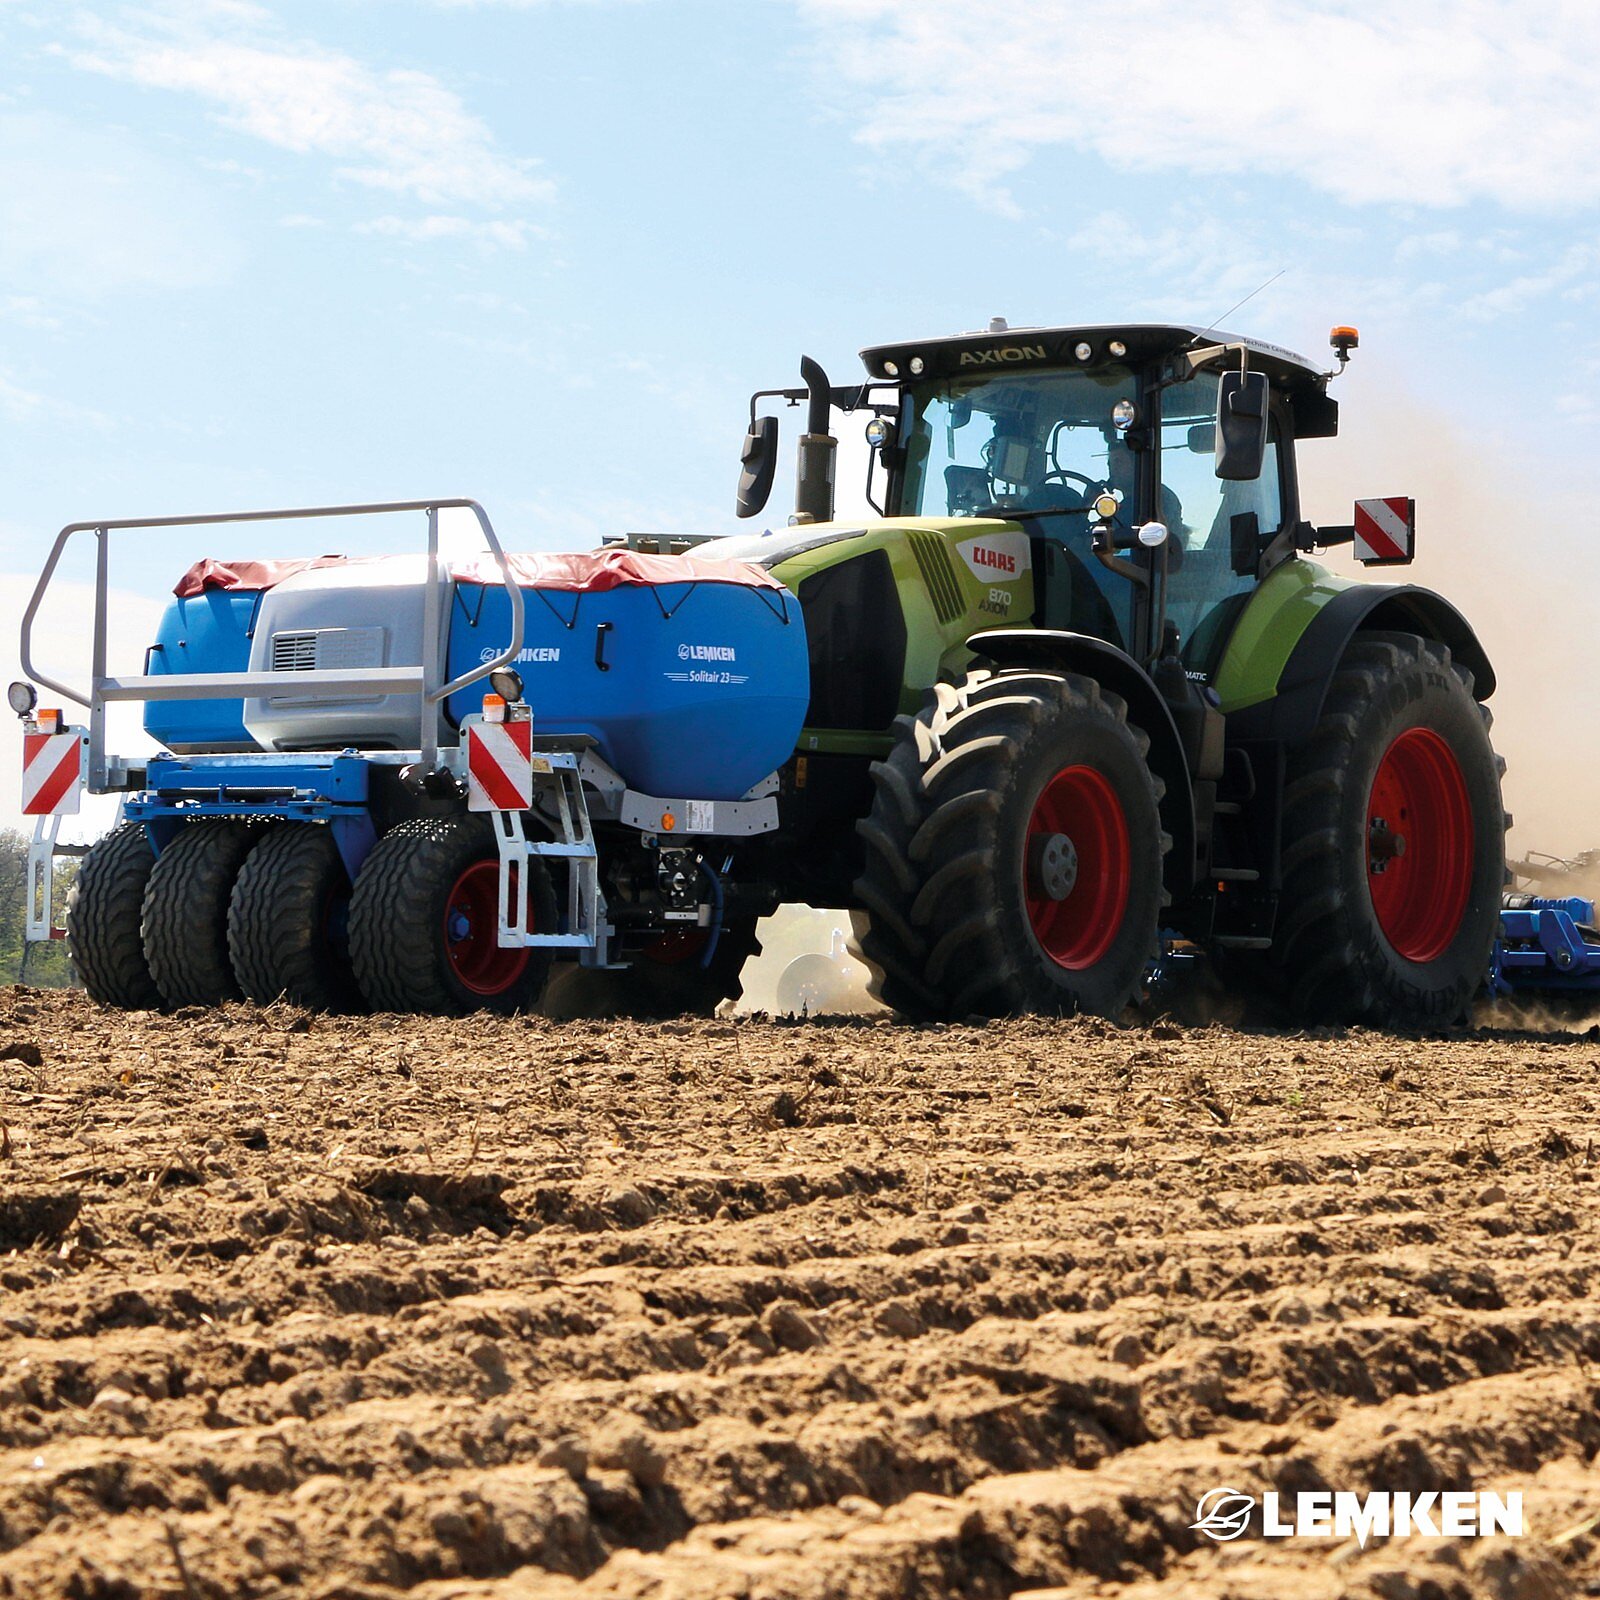 Sowing or fertilizing - no problem 🤩

With a hopper volume of 1,900 litres, our Solitair 23+ can be combined with...